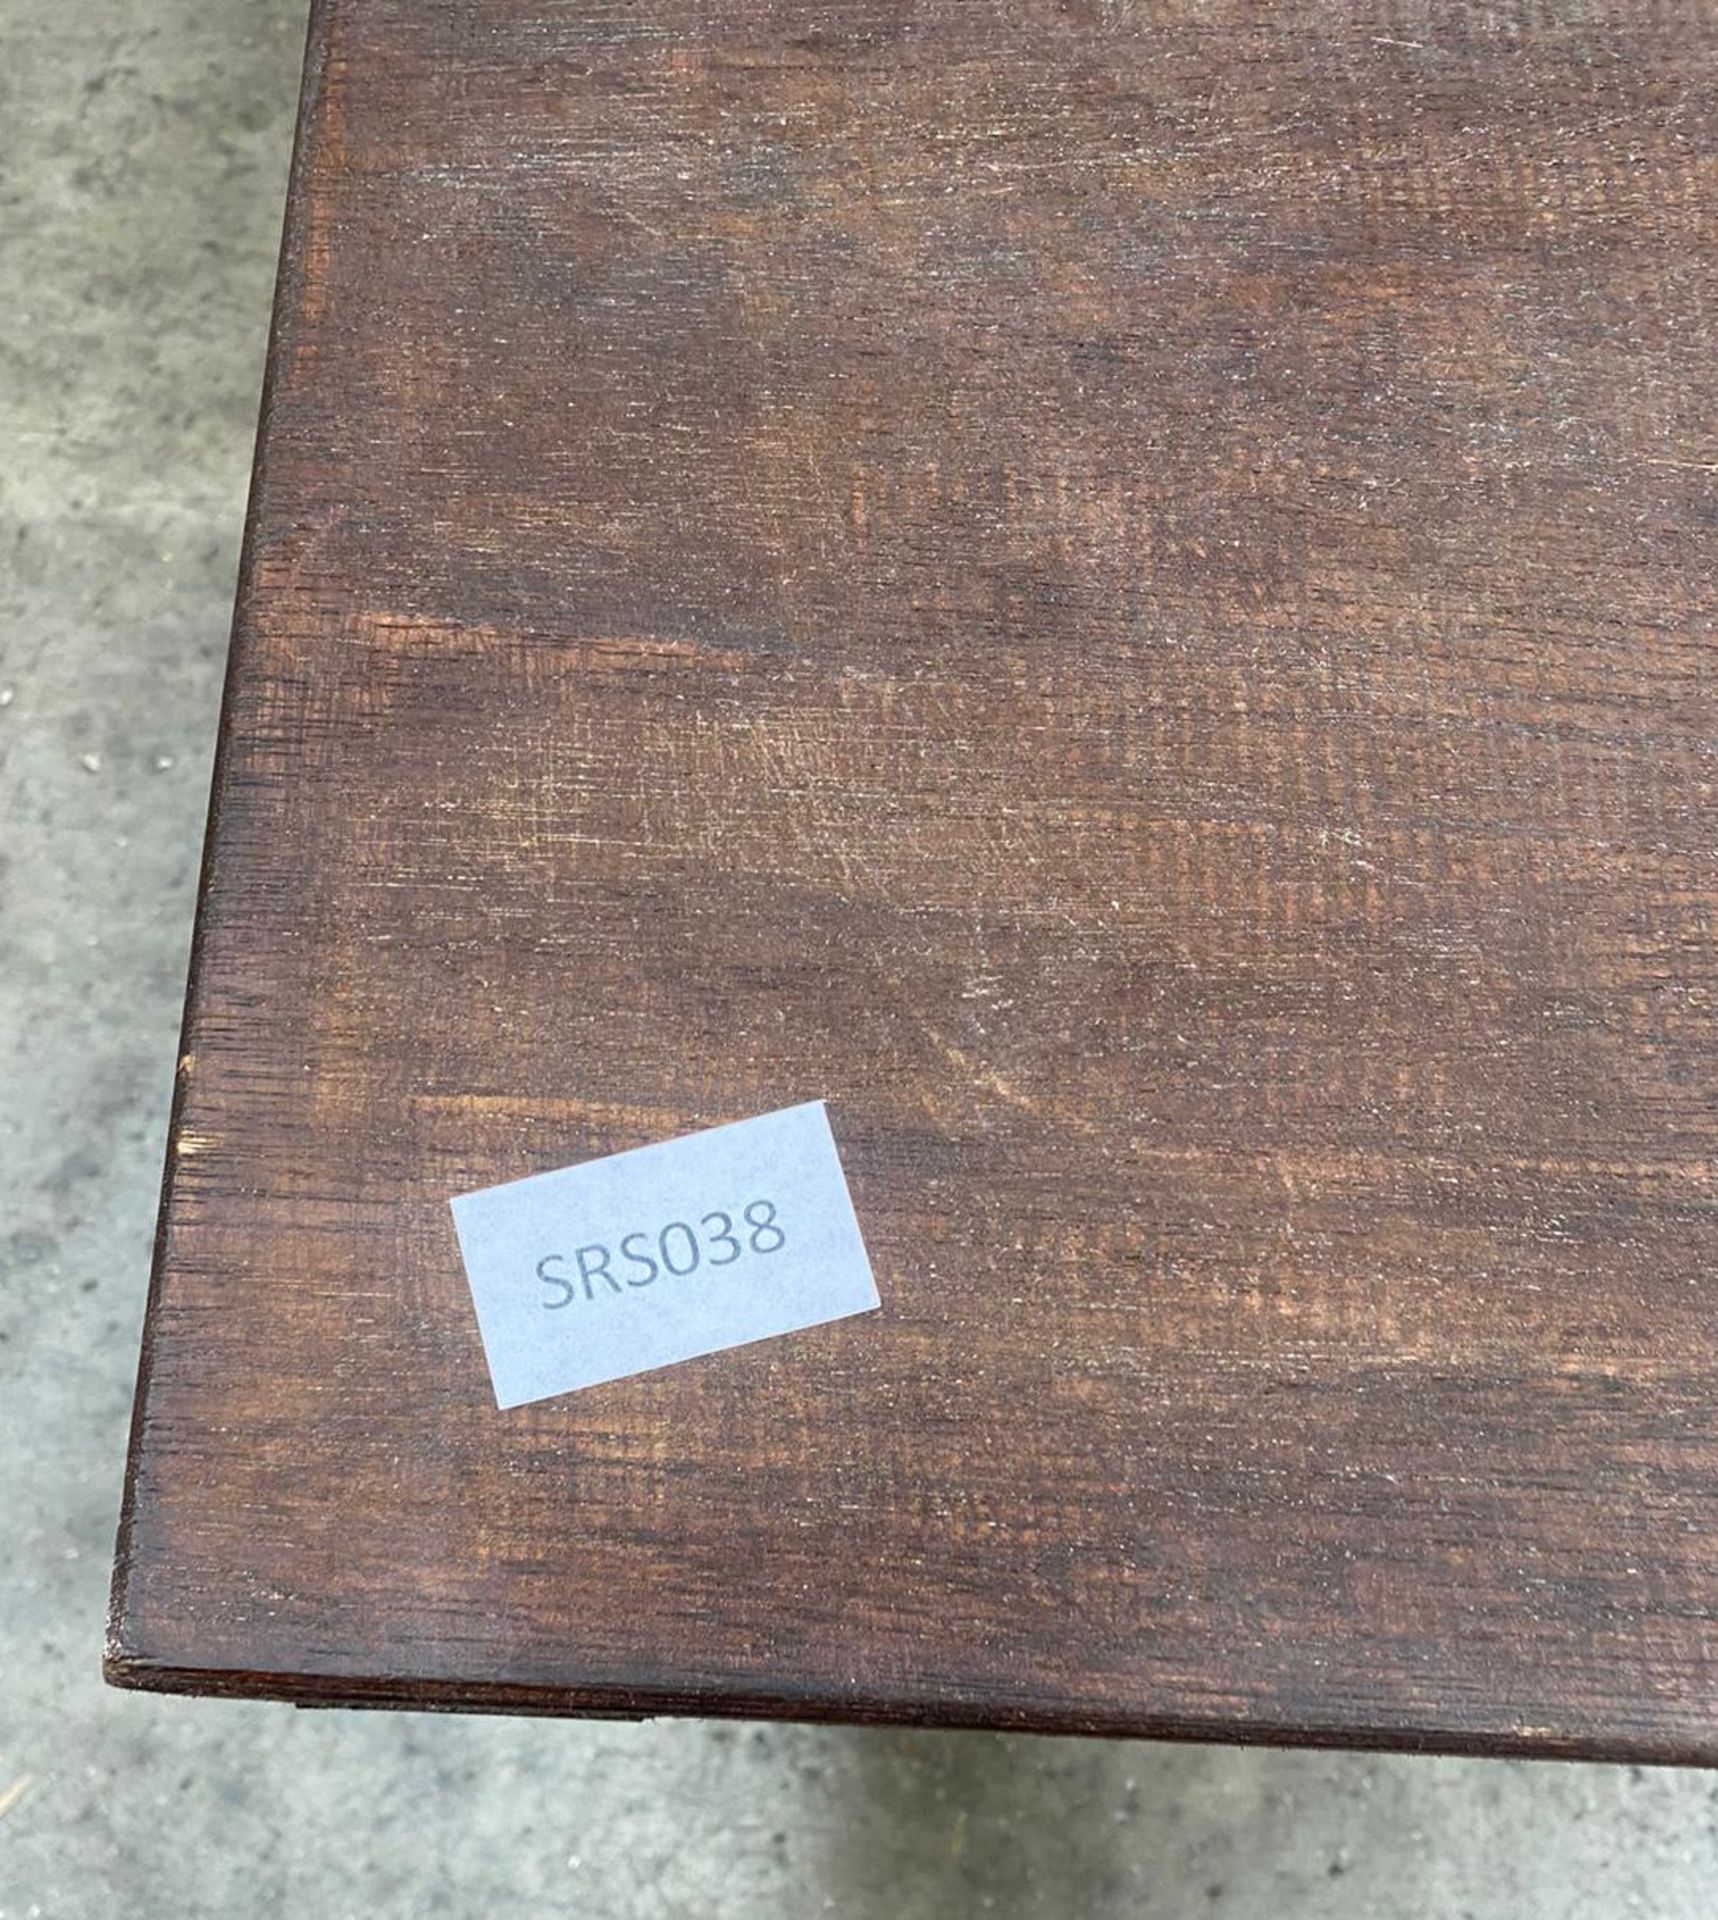 1 x Meranti Wood Occasional Table - Size: 500 x 500 x 600mm - Image 3 of 3